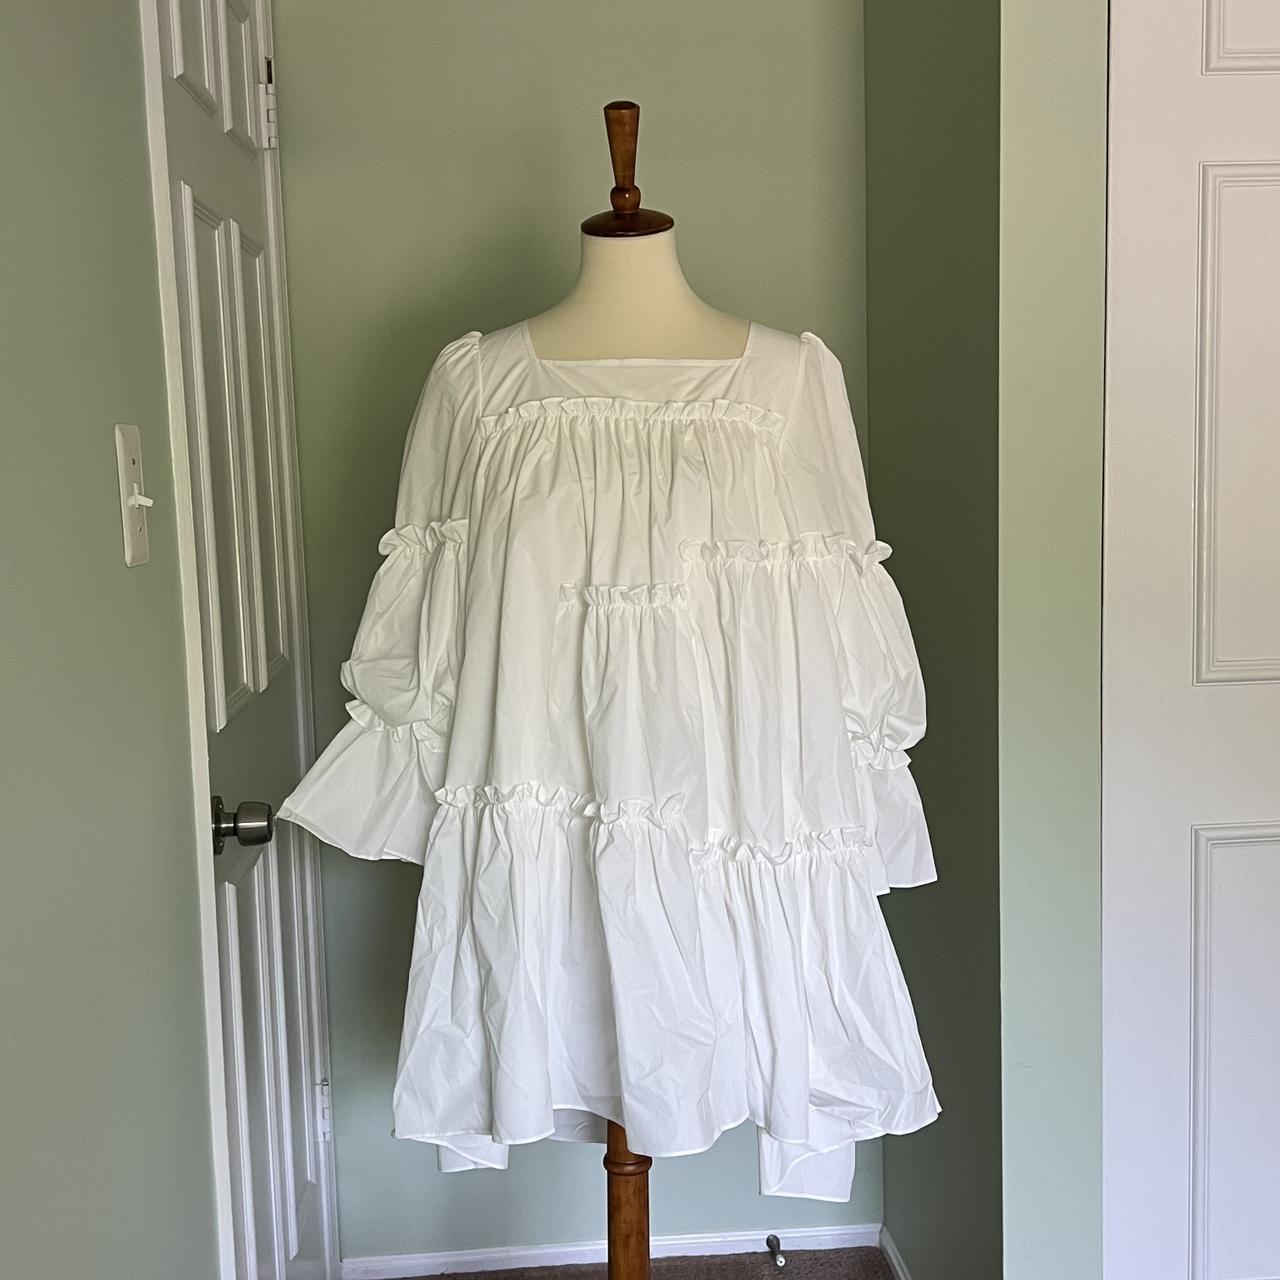 NWT from J.ing , Never worn!, 🕊️White babydoll